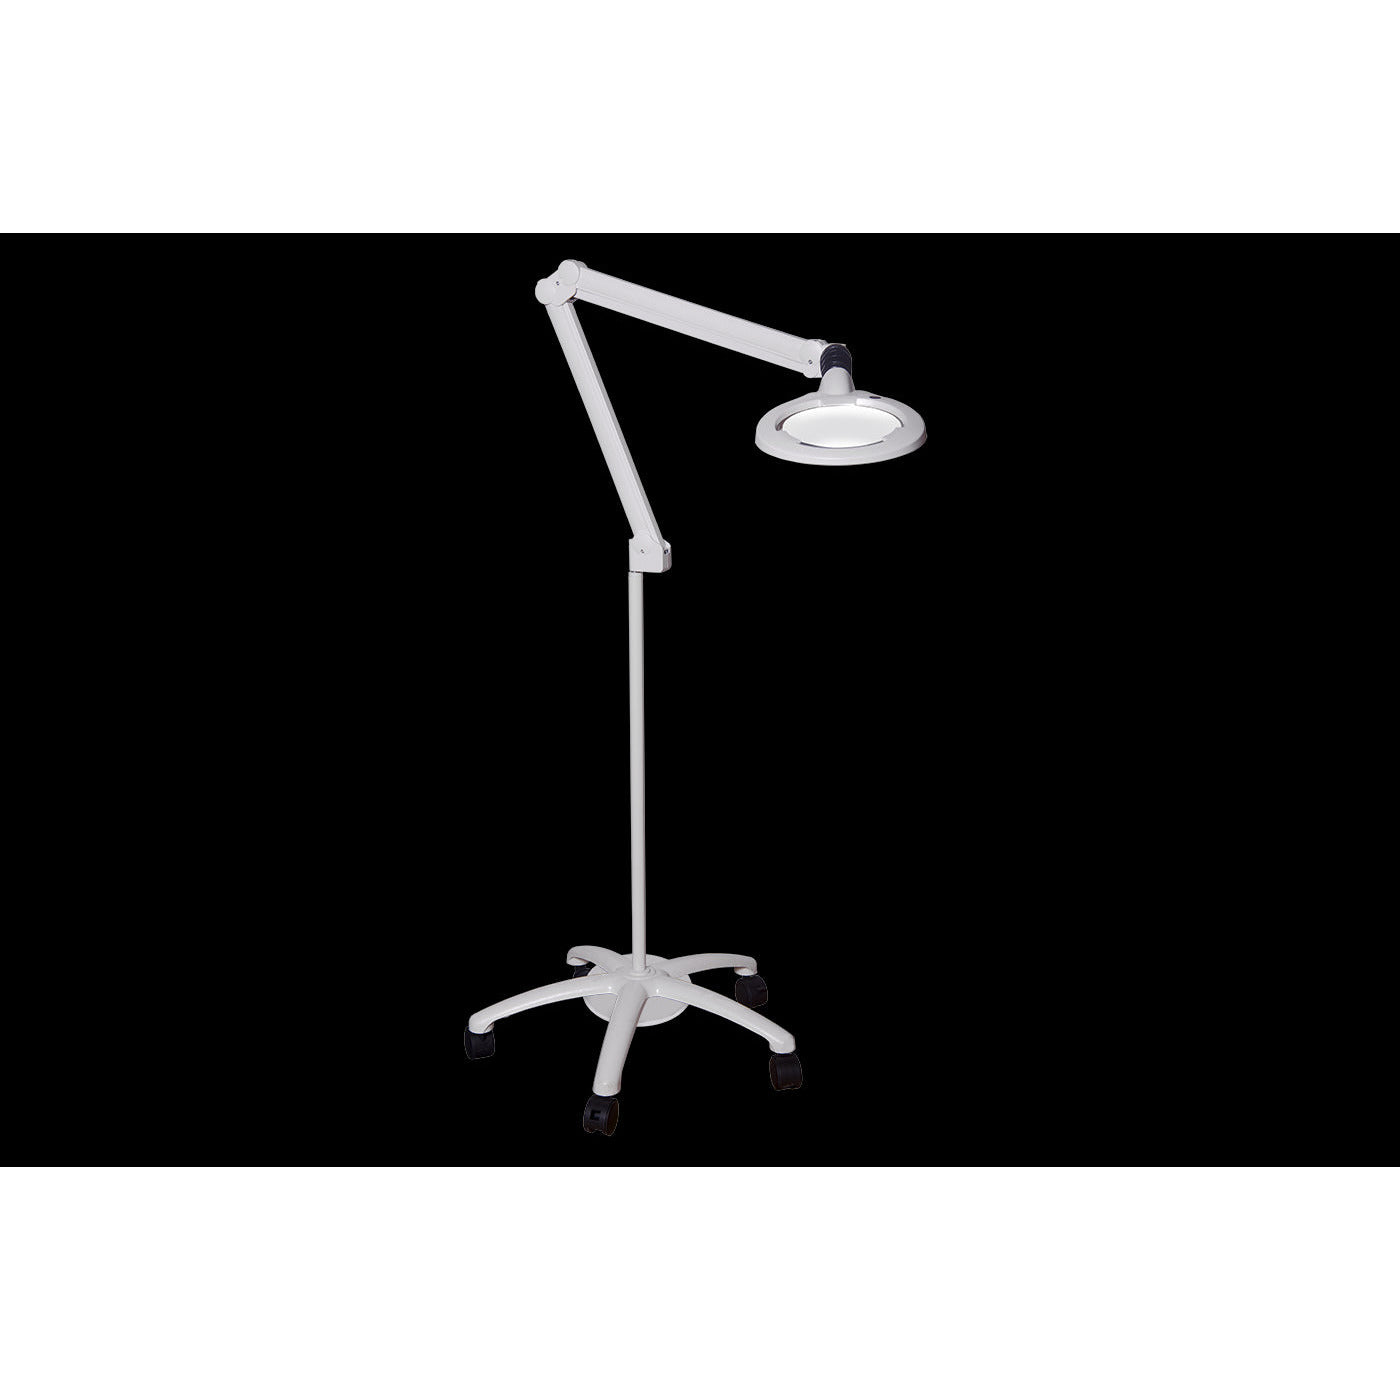 Glamox Luxo Circus LED Medical Illuminated Dimmable Magnifier with 3.5d Lens